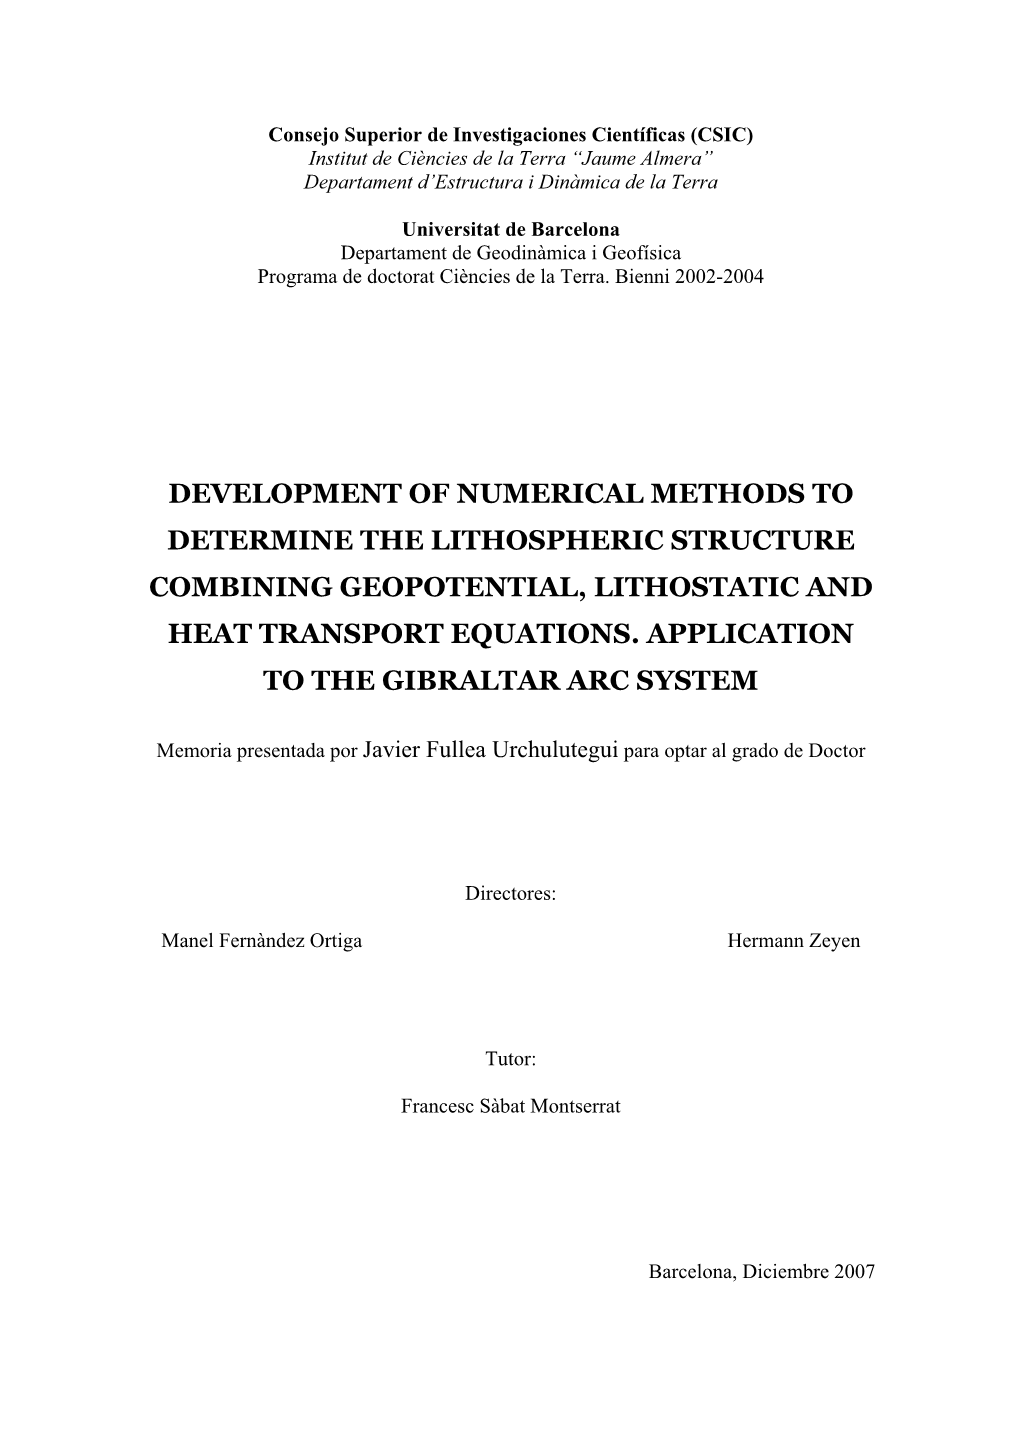 Development of Numerical Methods to Determine the Lithospheric Structure Combining Geopotential, Lithostatic and Heat Transport Equations